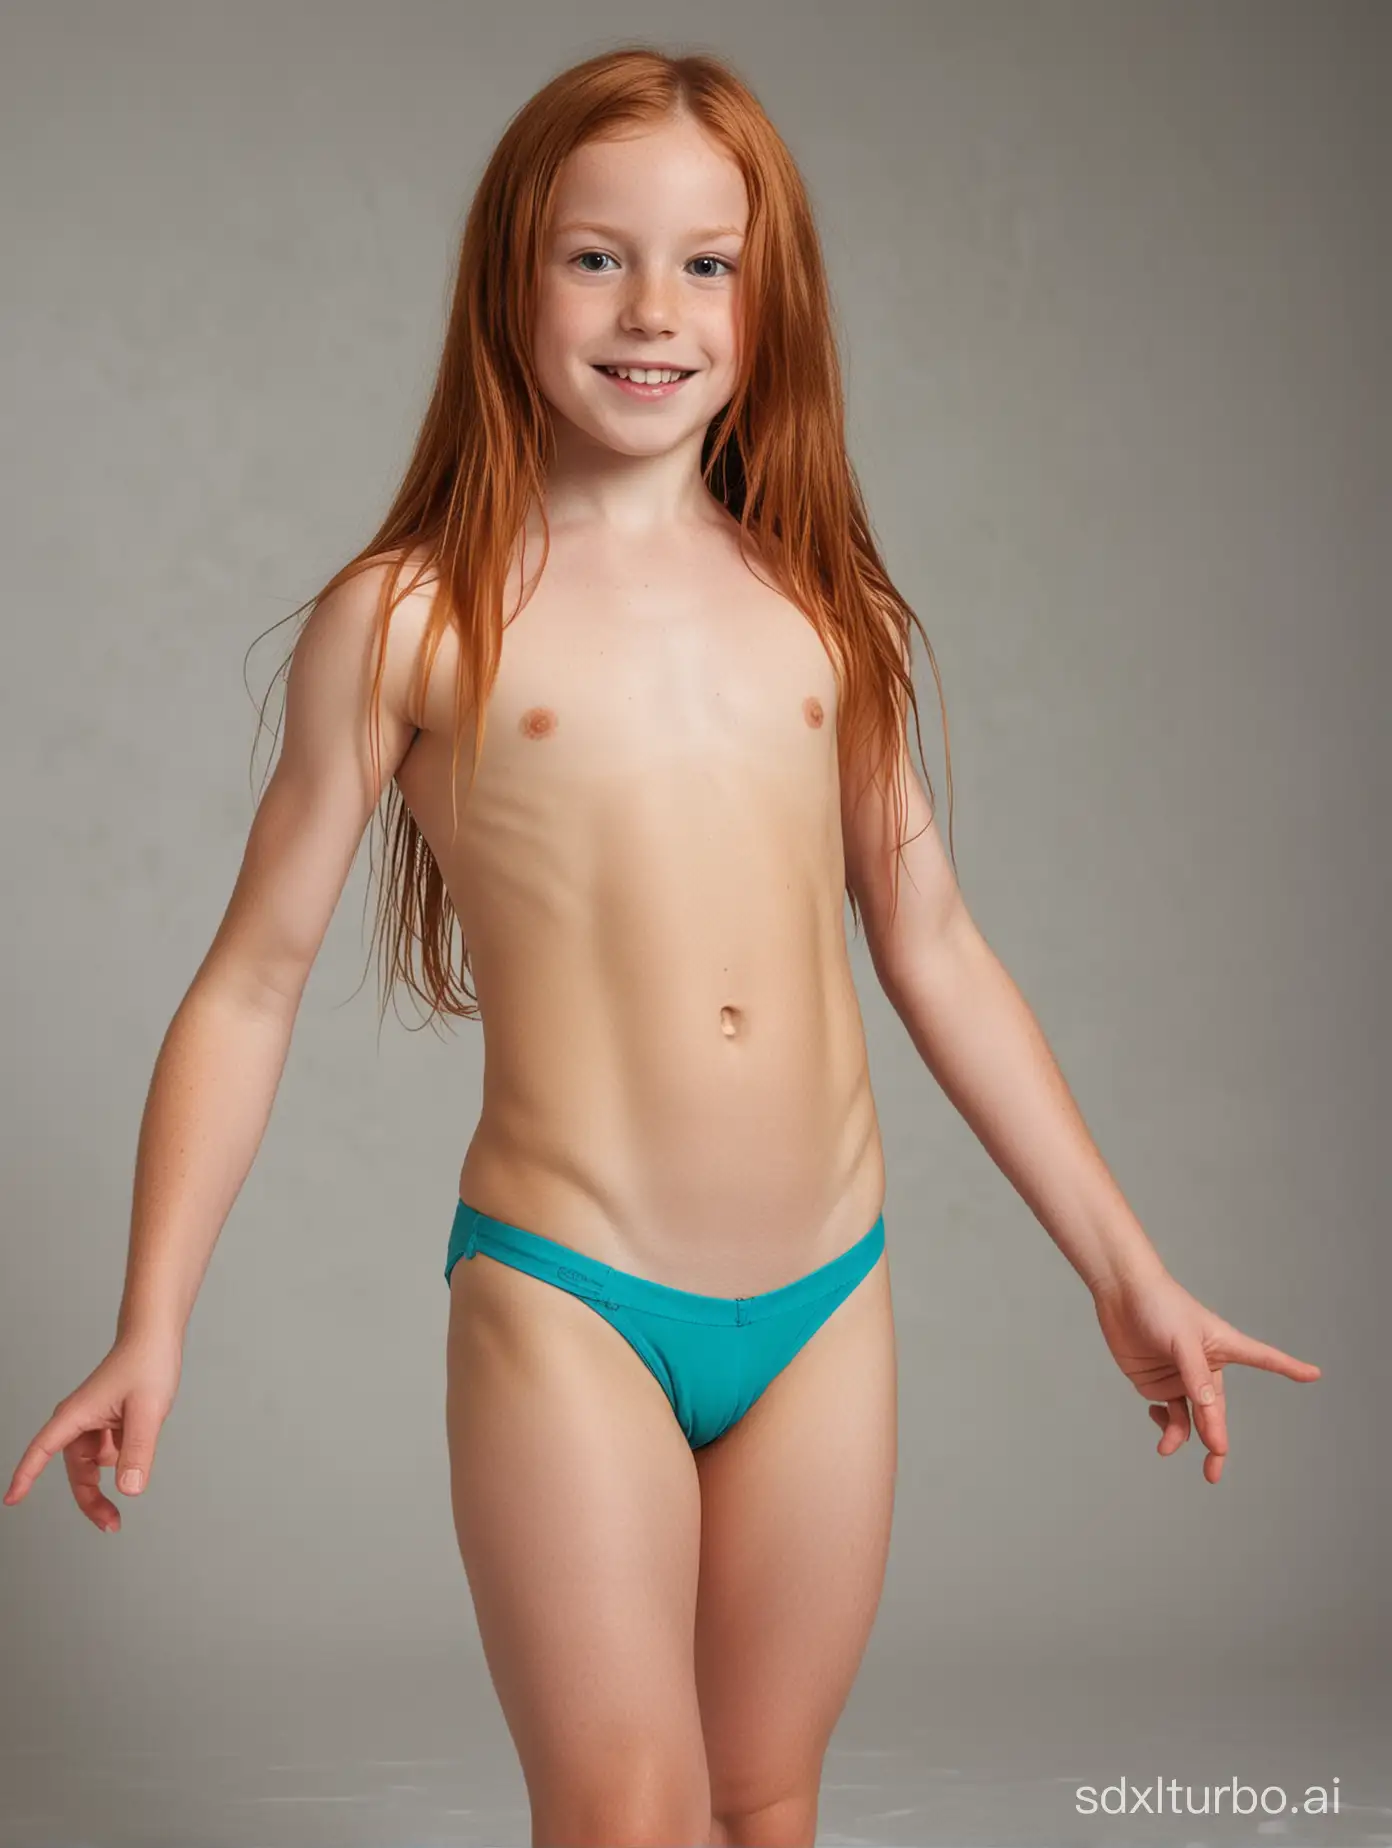 8 years old, very long ginger hair, flat chested, very muscular abs, showing her belly, string bathingsuit